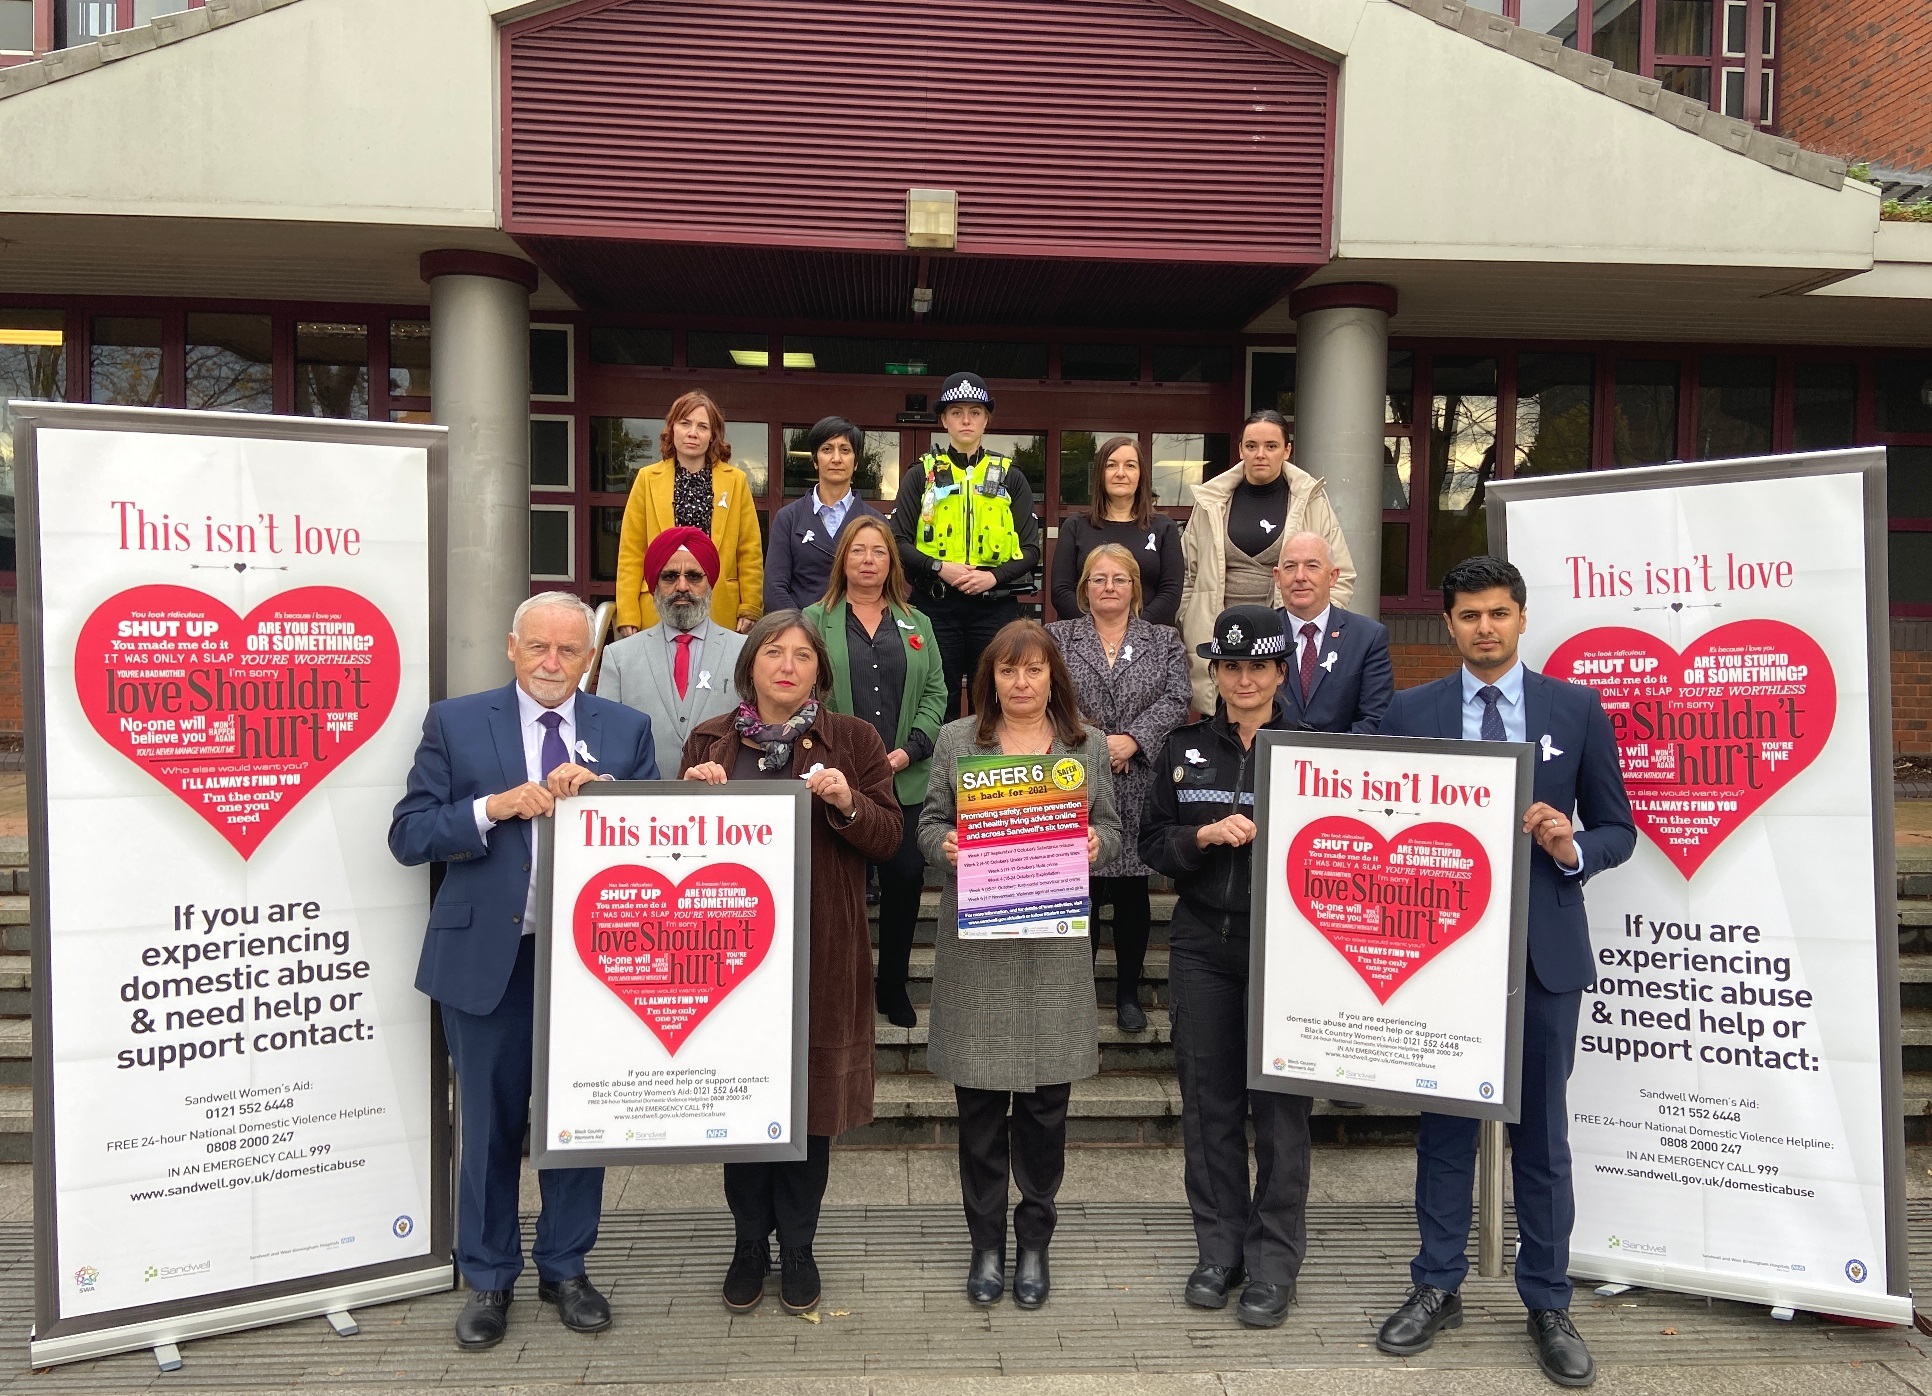 16 Days of Action Against Domestic Abuse – keeping everyone safe Image